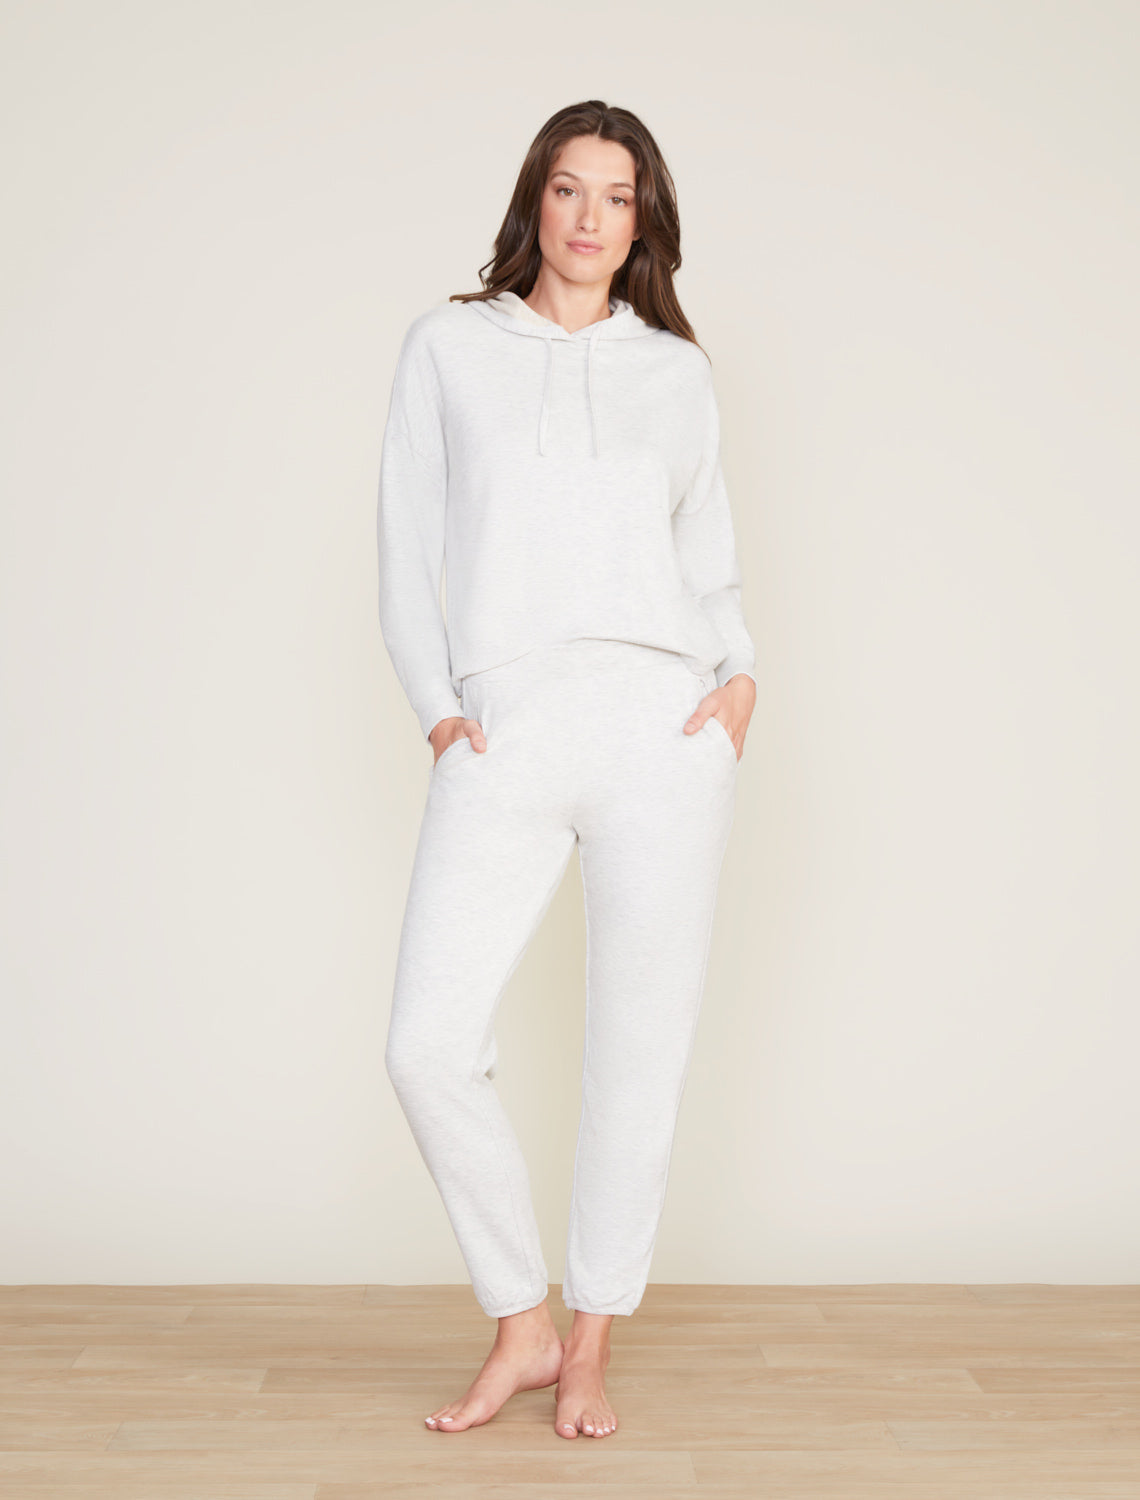 Wholesale jogger set women for Sleep and Well-Being –